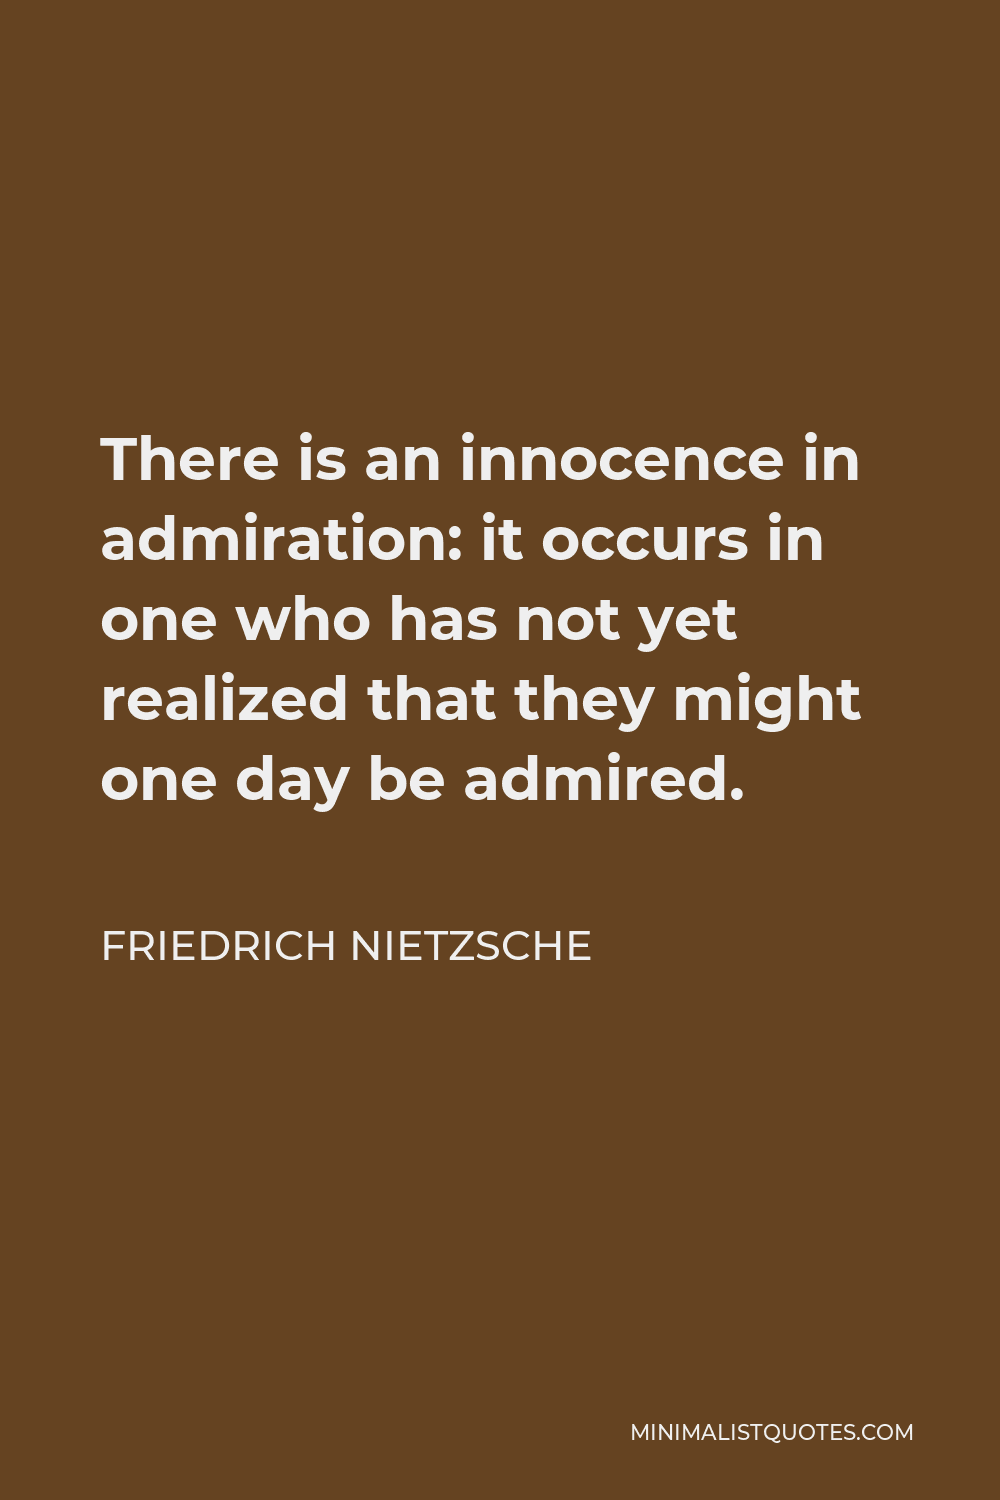 Friedrich Nietzsche Quote - There is an innocence in admiration: it occurs in one who has not yet realized that they might one day be admired.